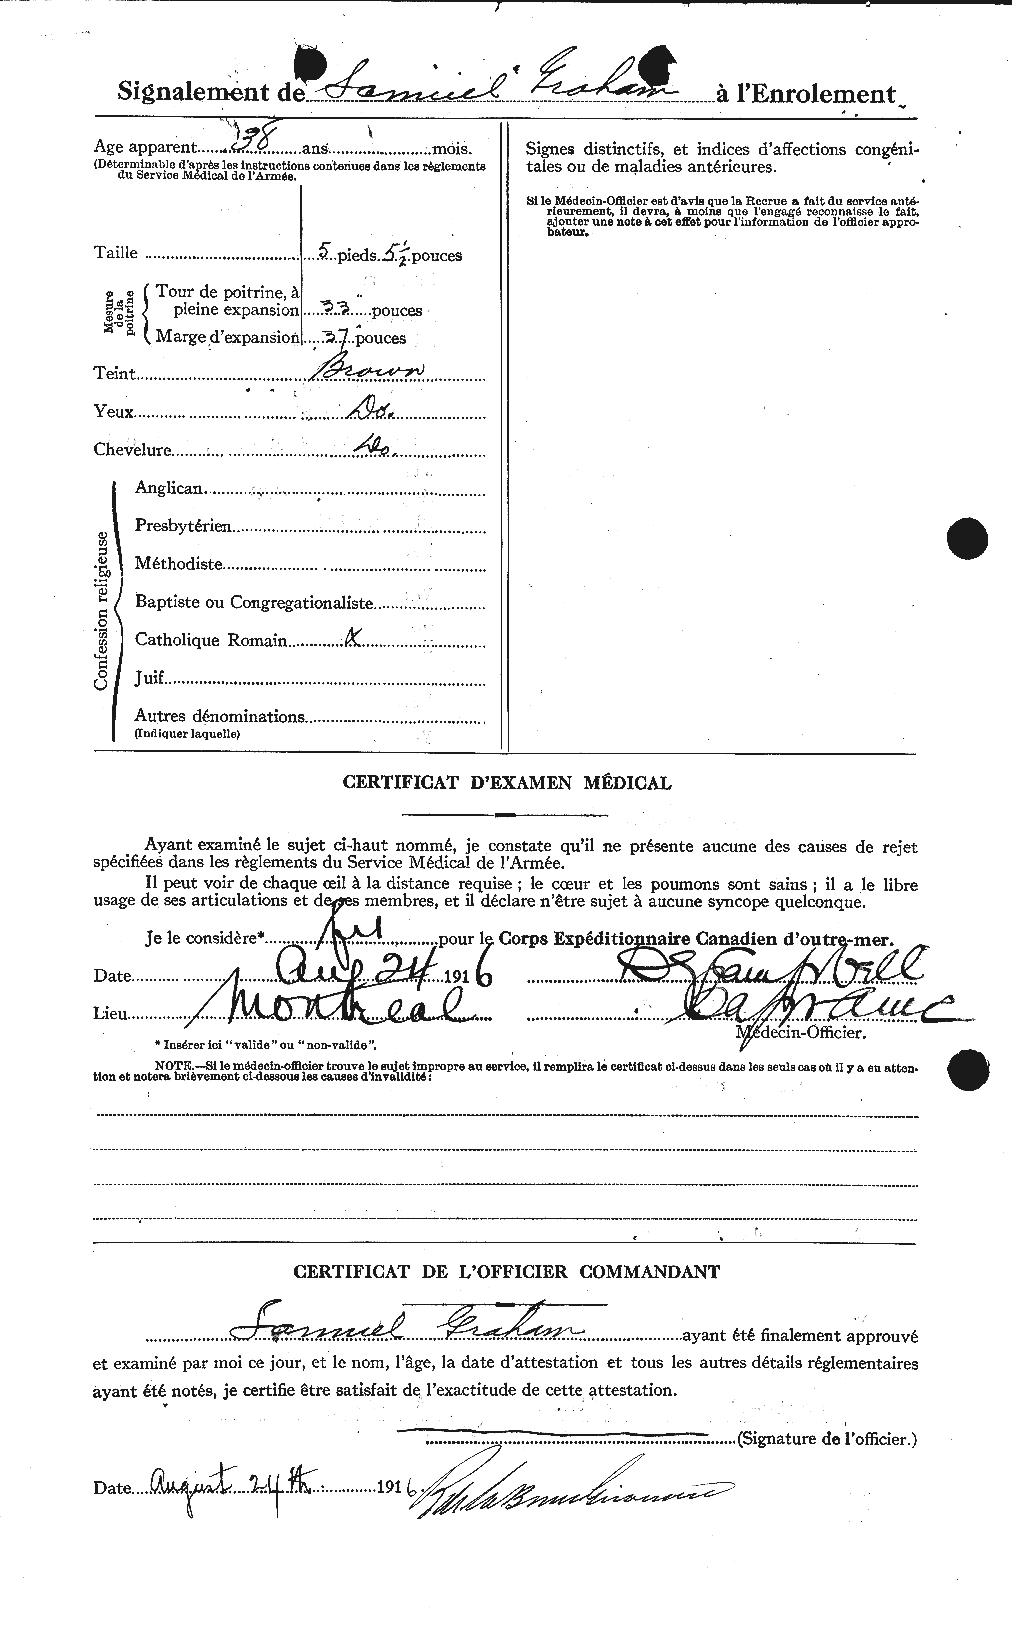 Personnel Records of the First World War - CEF 359450b